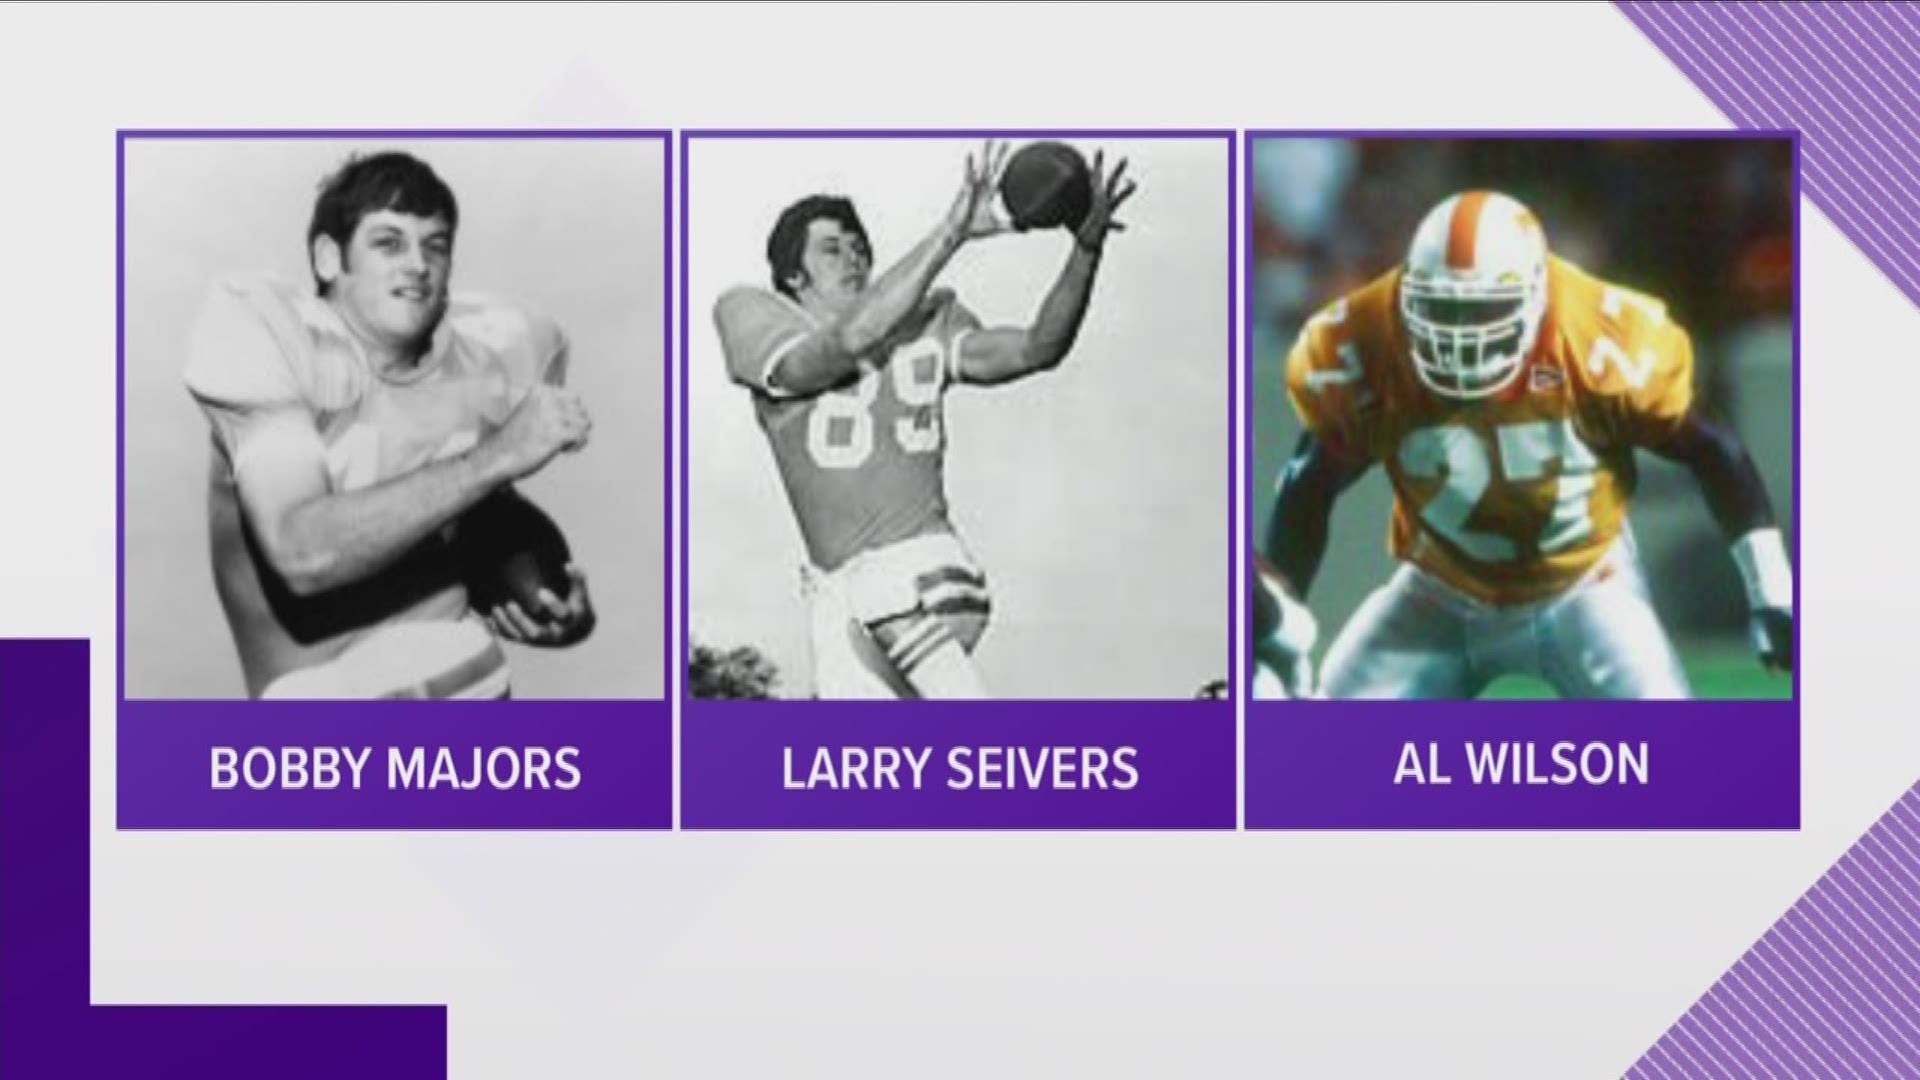 Bobby Majors led the Vols to bowl wins in 1971 and '72; Larry Seivers made the first team All-American in 1975 and '76; and Al Wilson was on the 1998 championship team.